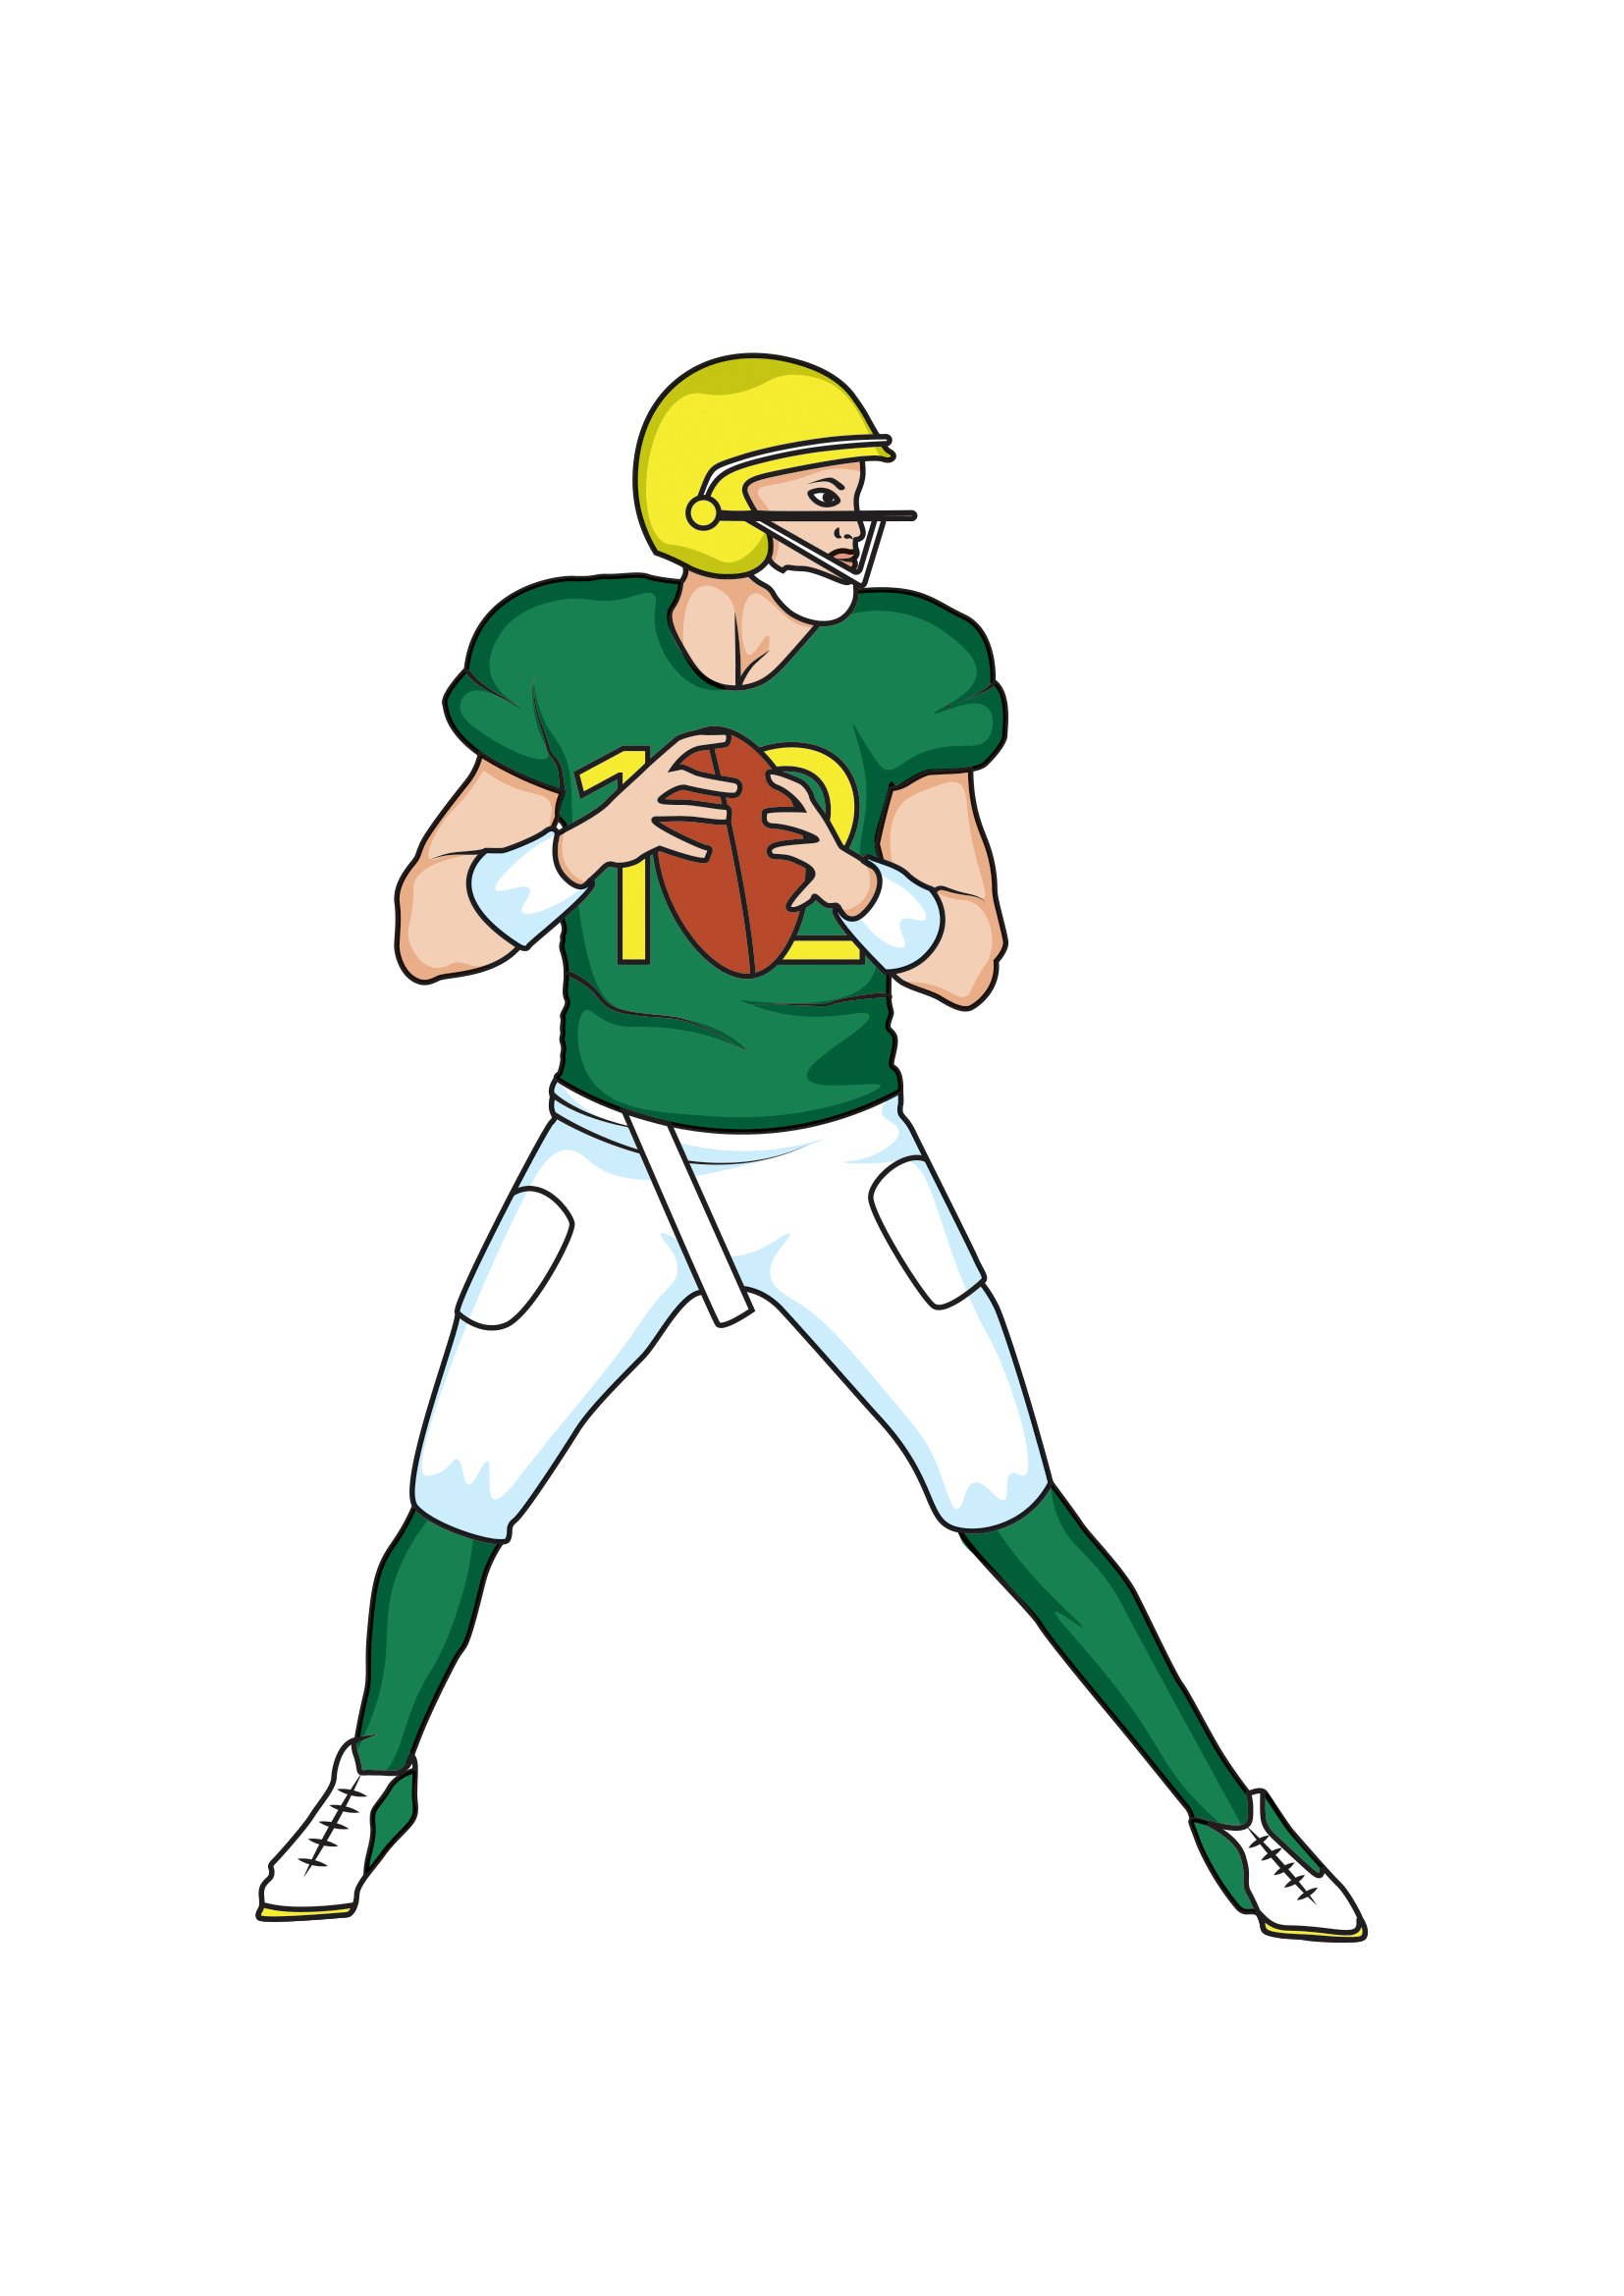 How to Draw A Football Player Step by Step Printable